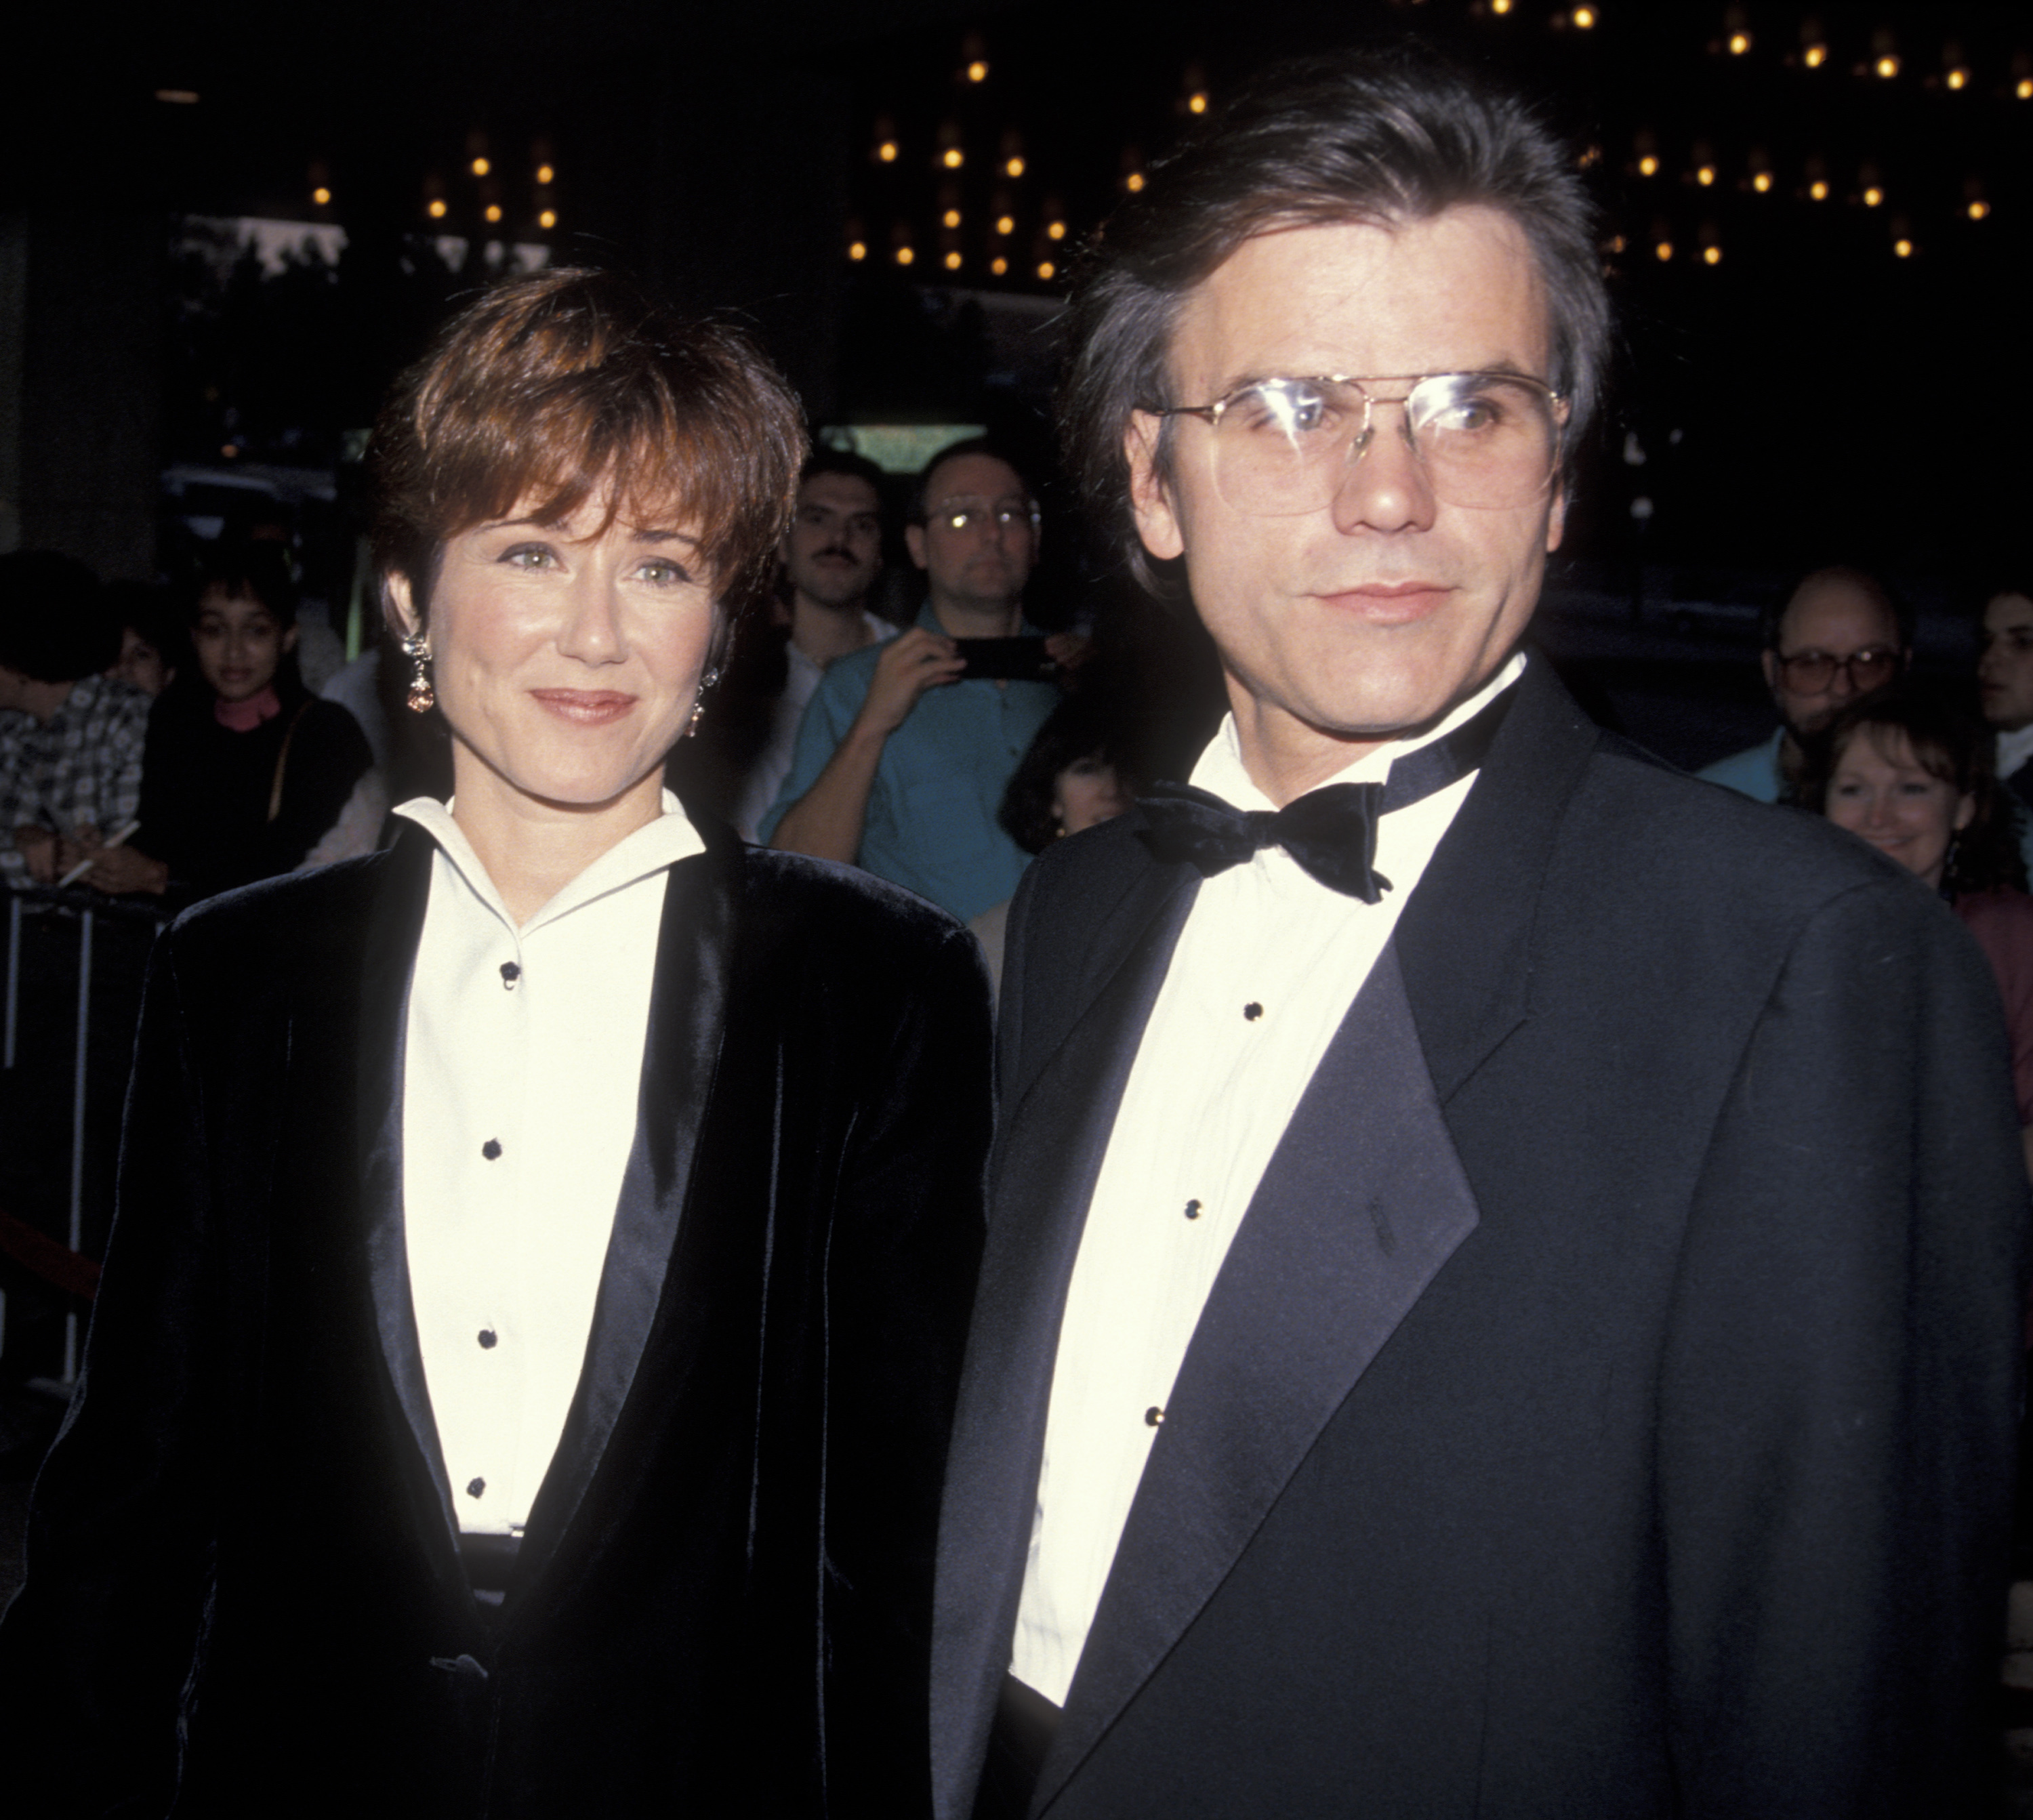 Mary McDonnell and Randle Mell on December 15, 1991 in Century City, California | Source: Getty Images